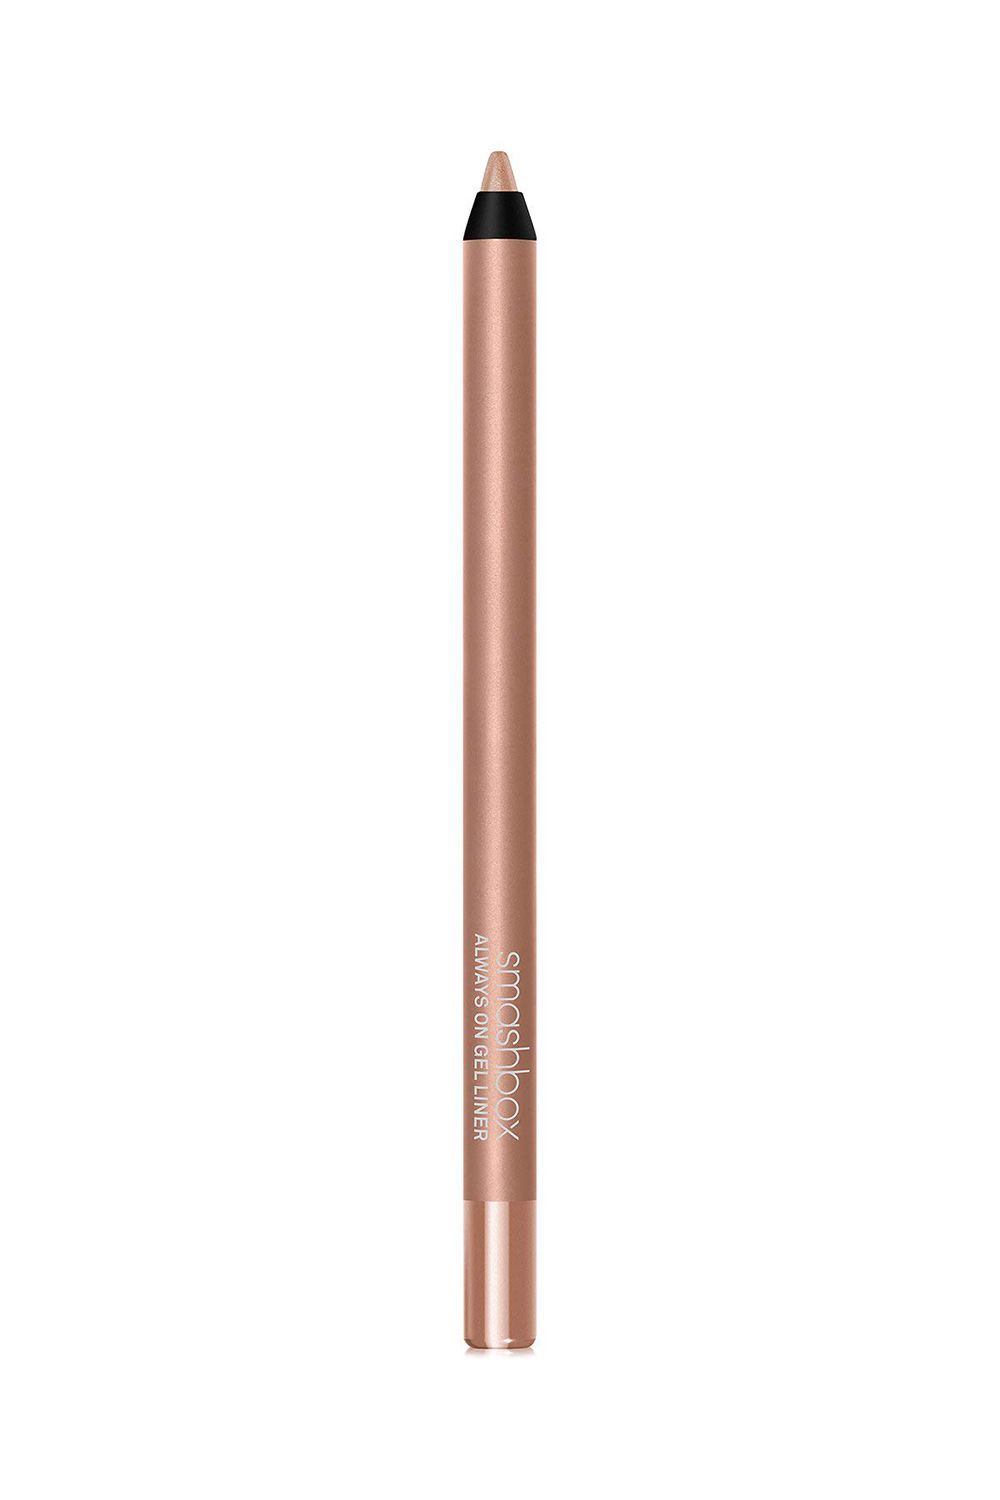 top rated eyeliner pencil